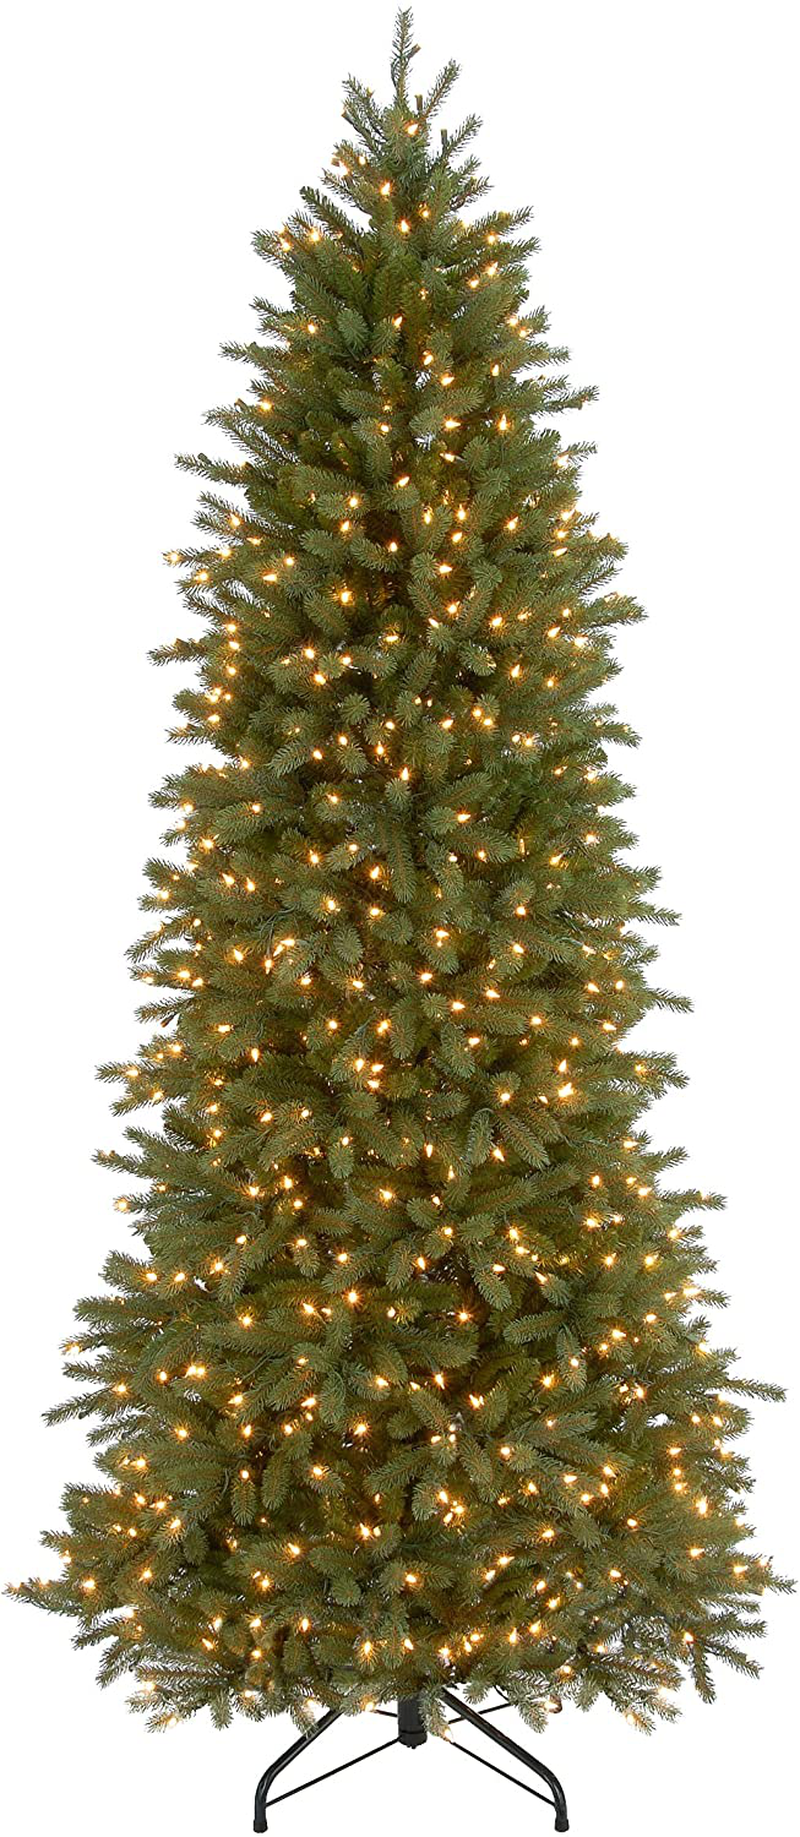 National Tree Company 'Feel Real' Pre-lit Artificial Christmas Tree | Includes Pre-strung White Lights and Stand | Jersey Fraser Fir Pencil Slim - 7.5 ft